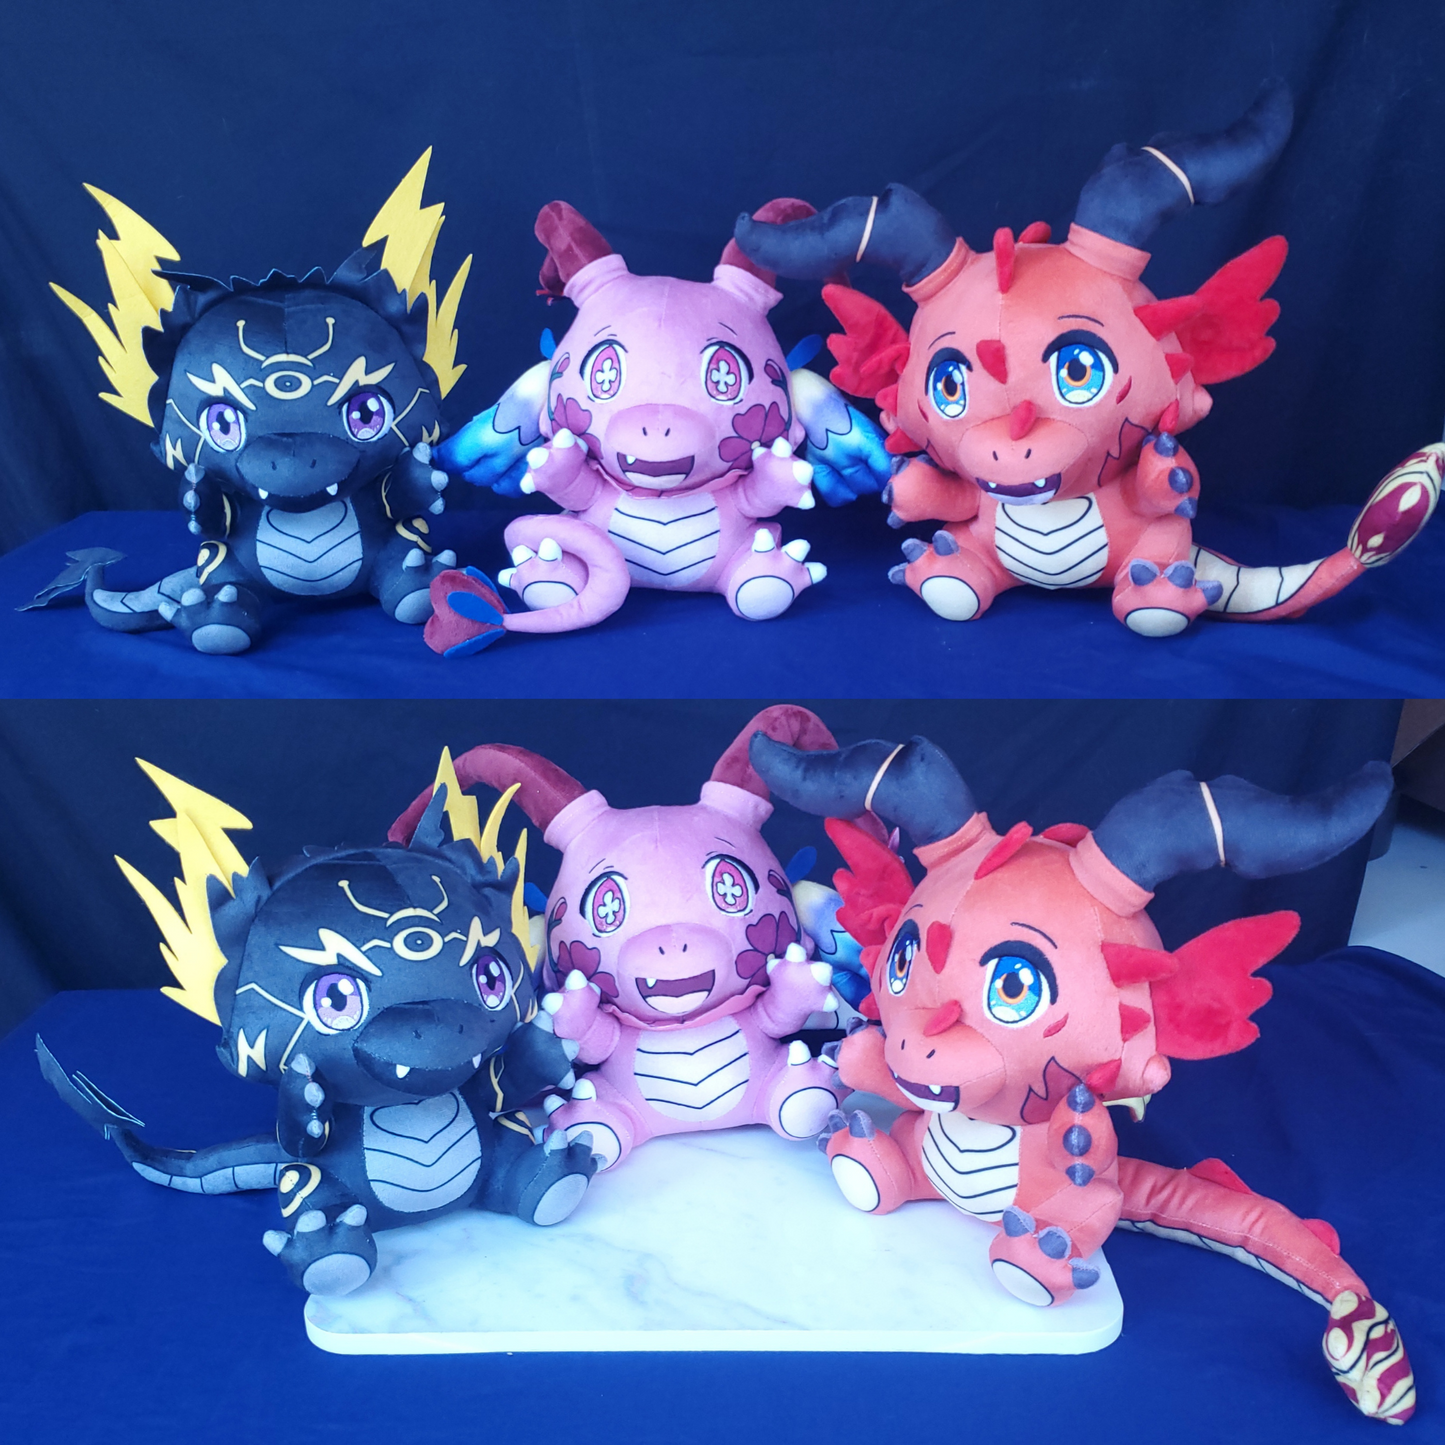 OUR LATEST UPCOMING TINY DRAGONS